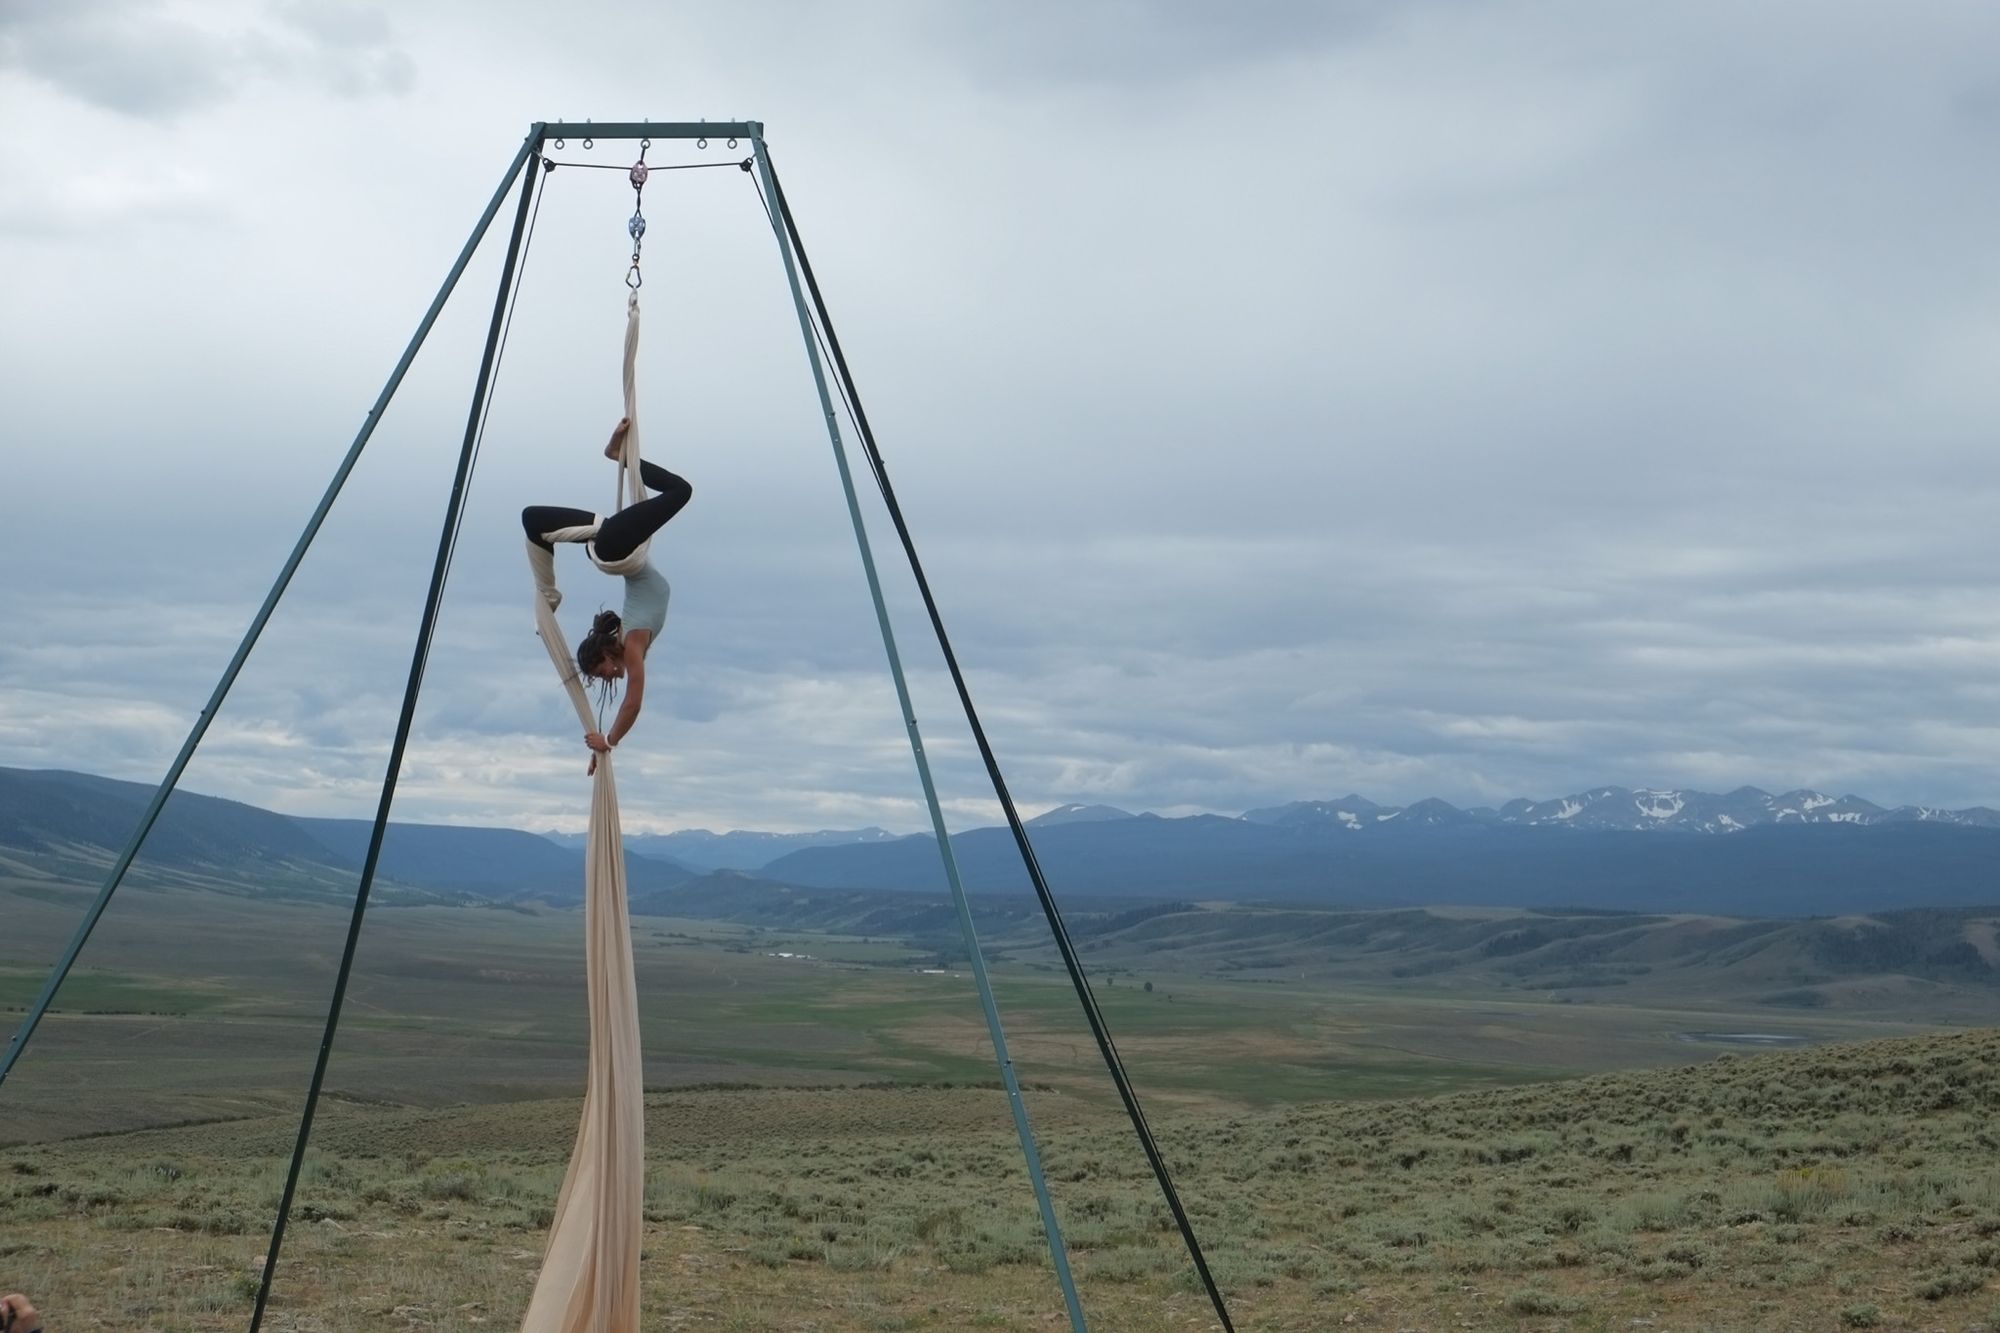 Woman wearing black pants and blue shirt doing aerial acrobatics with white fabric in front of a dramatic green mountain landscape